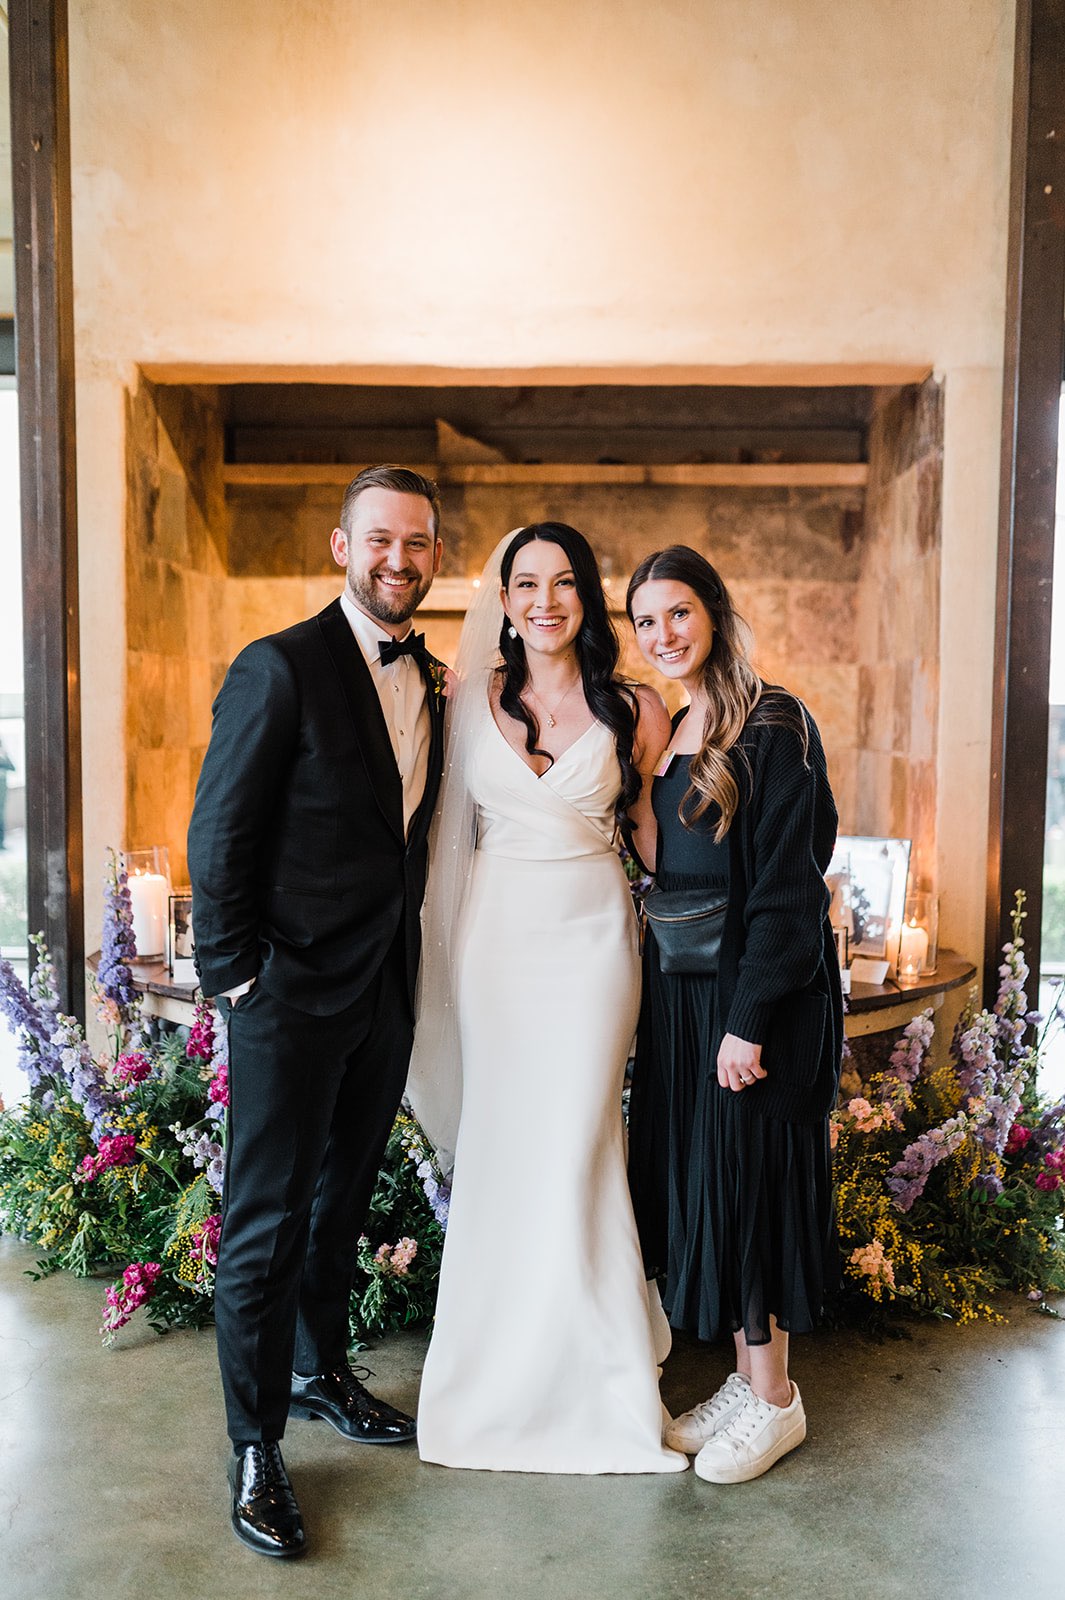 Austin wedding planner with bride and groom
